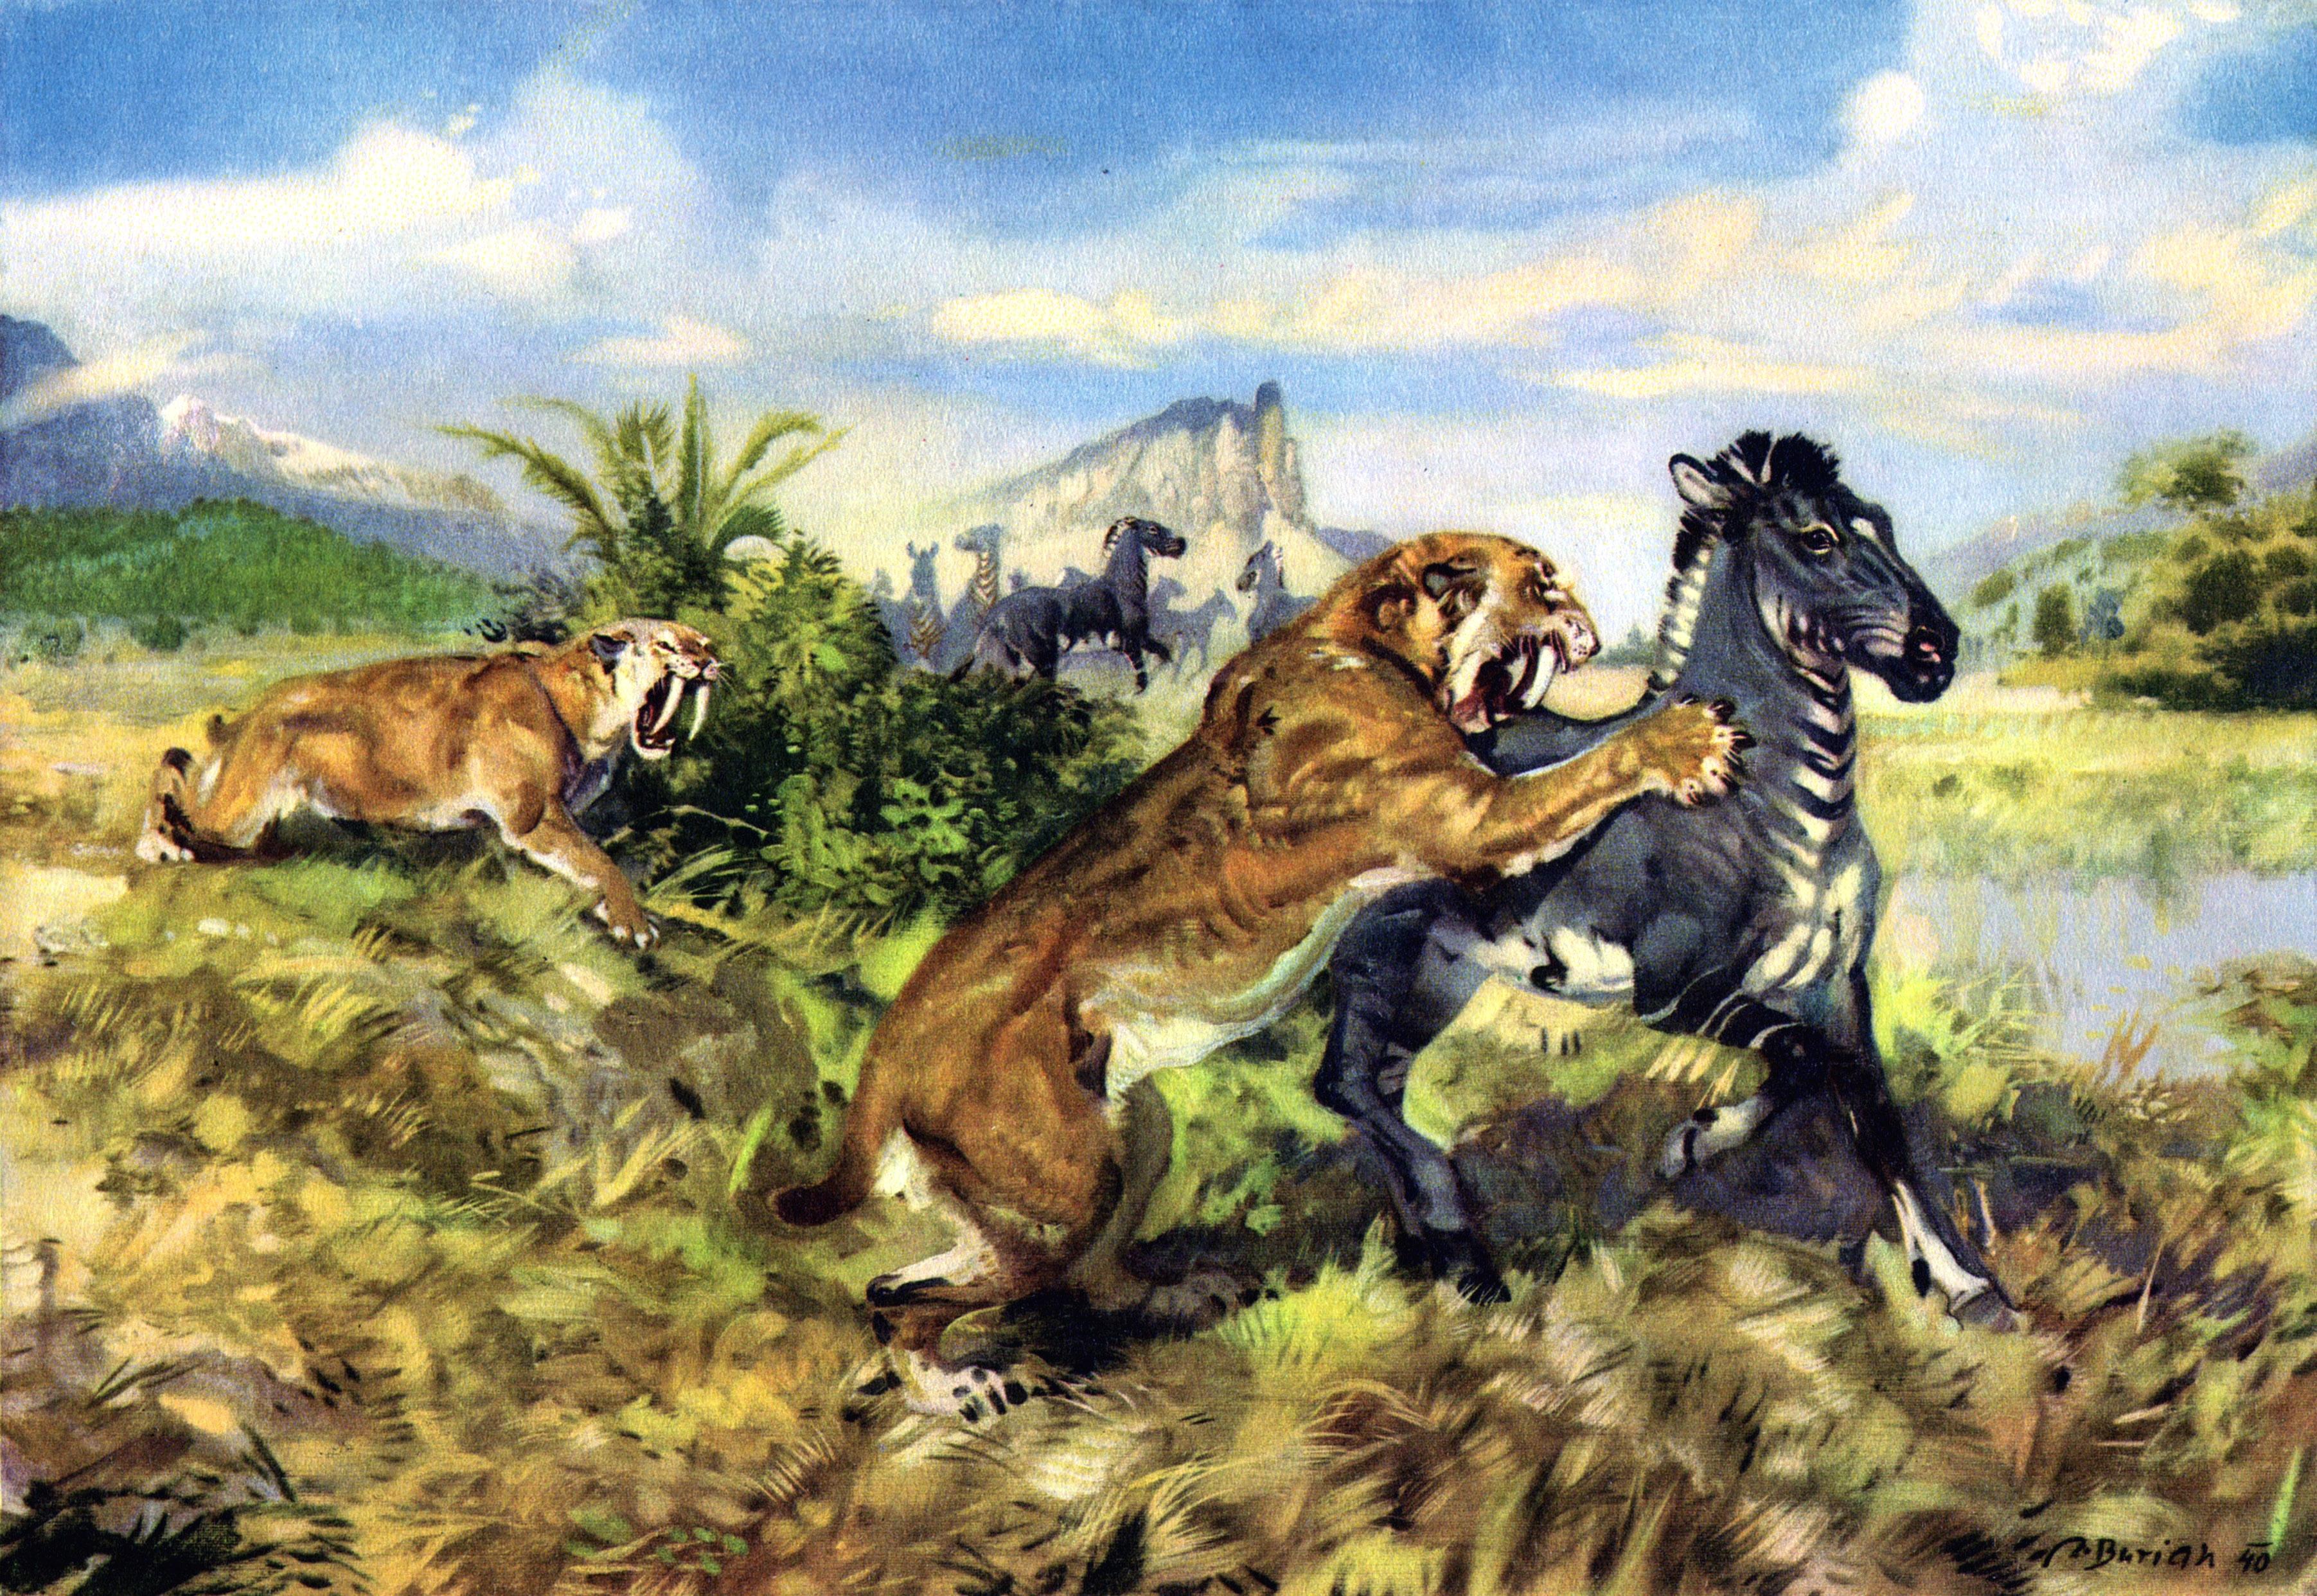 Saber Tooth Tiger Painting. Explore